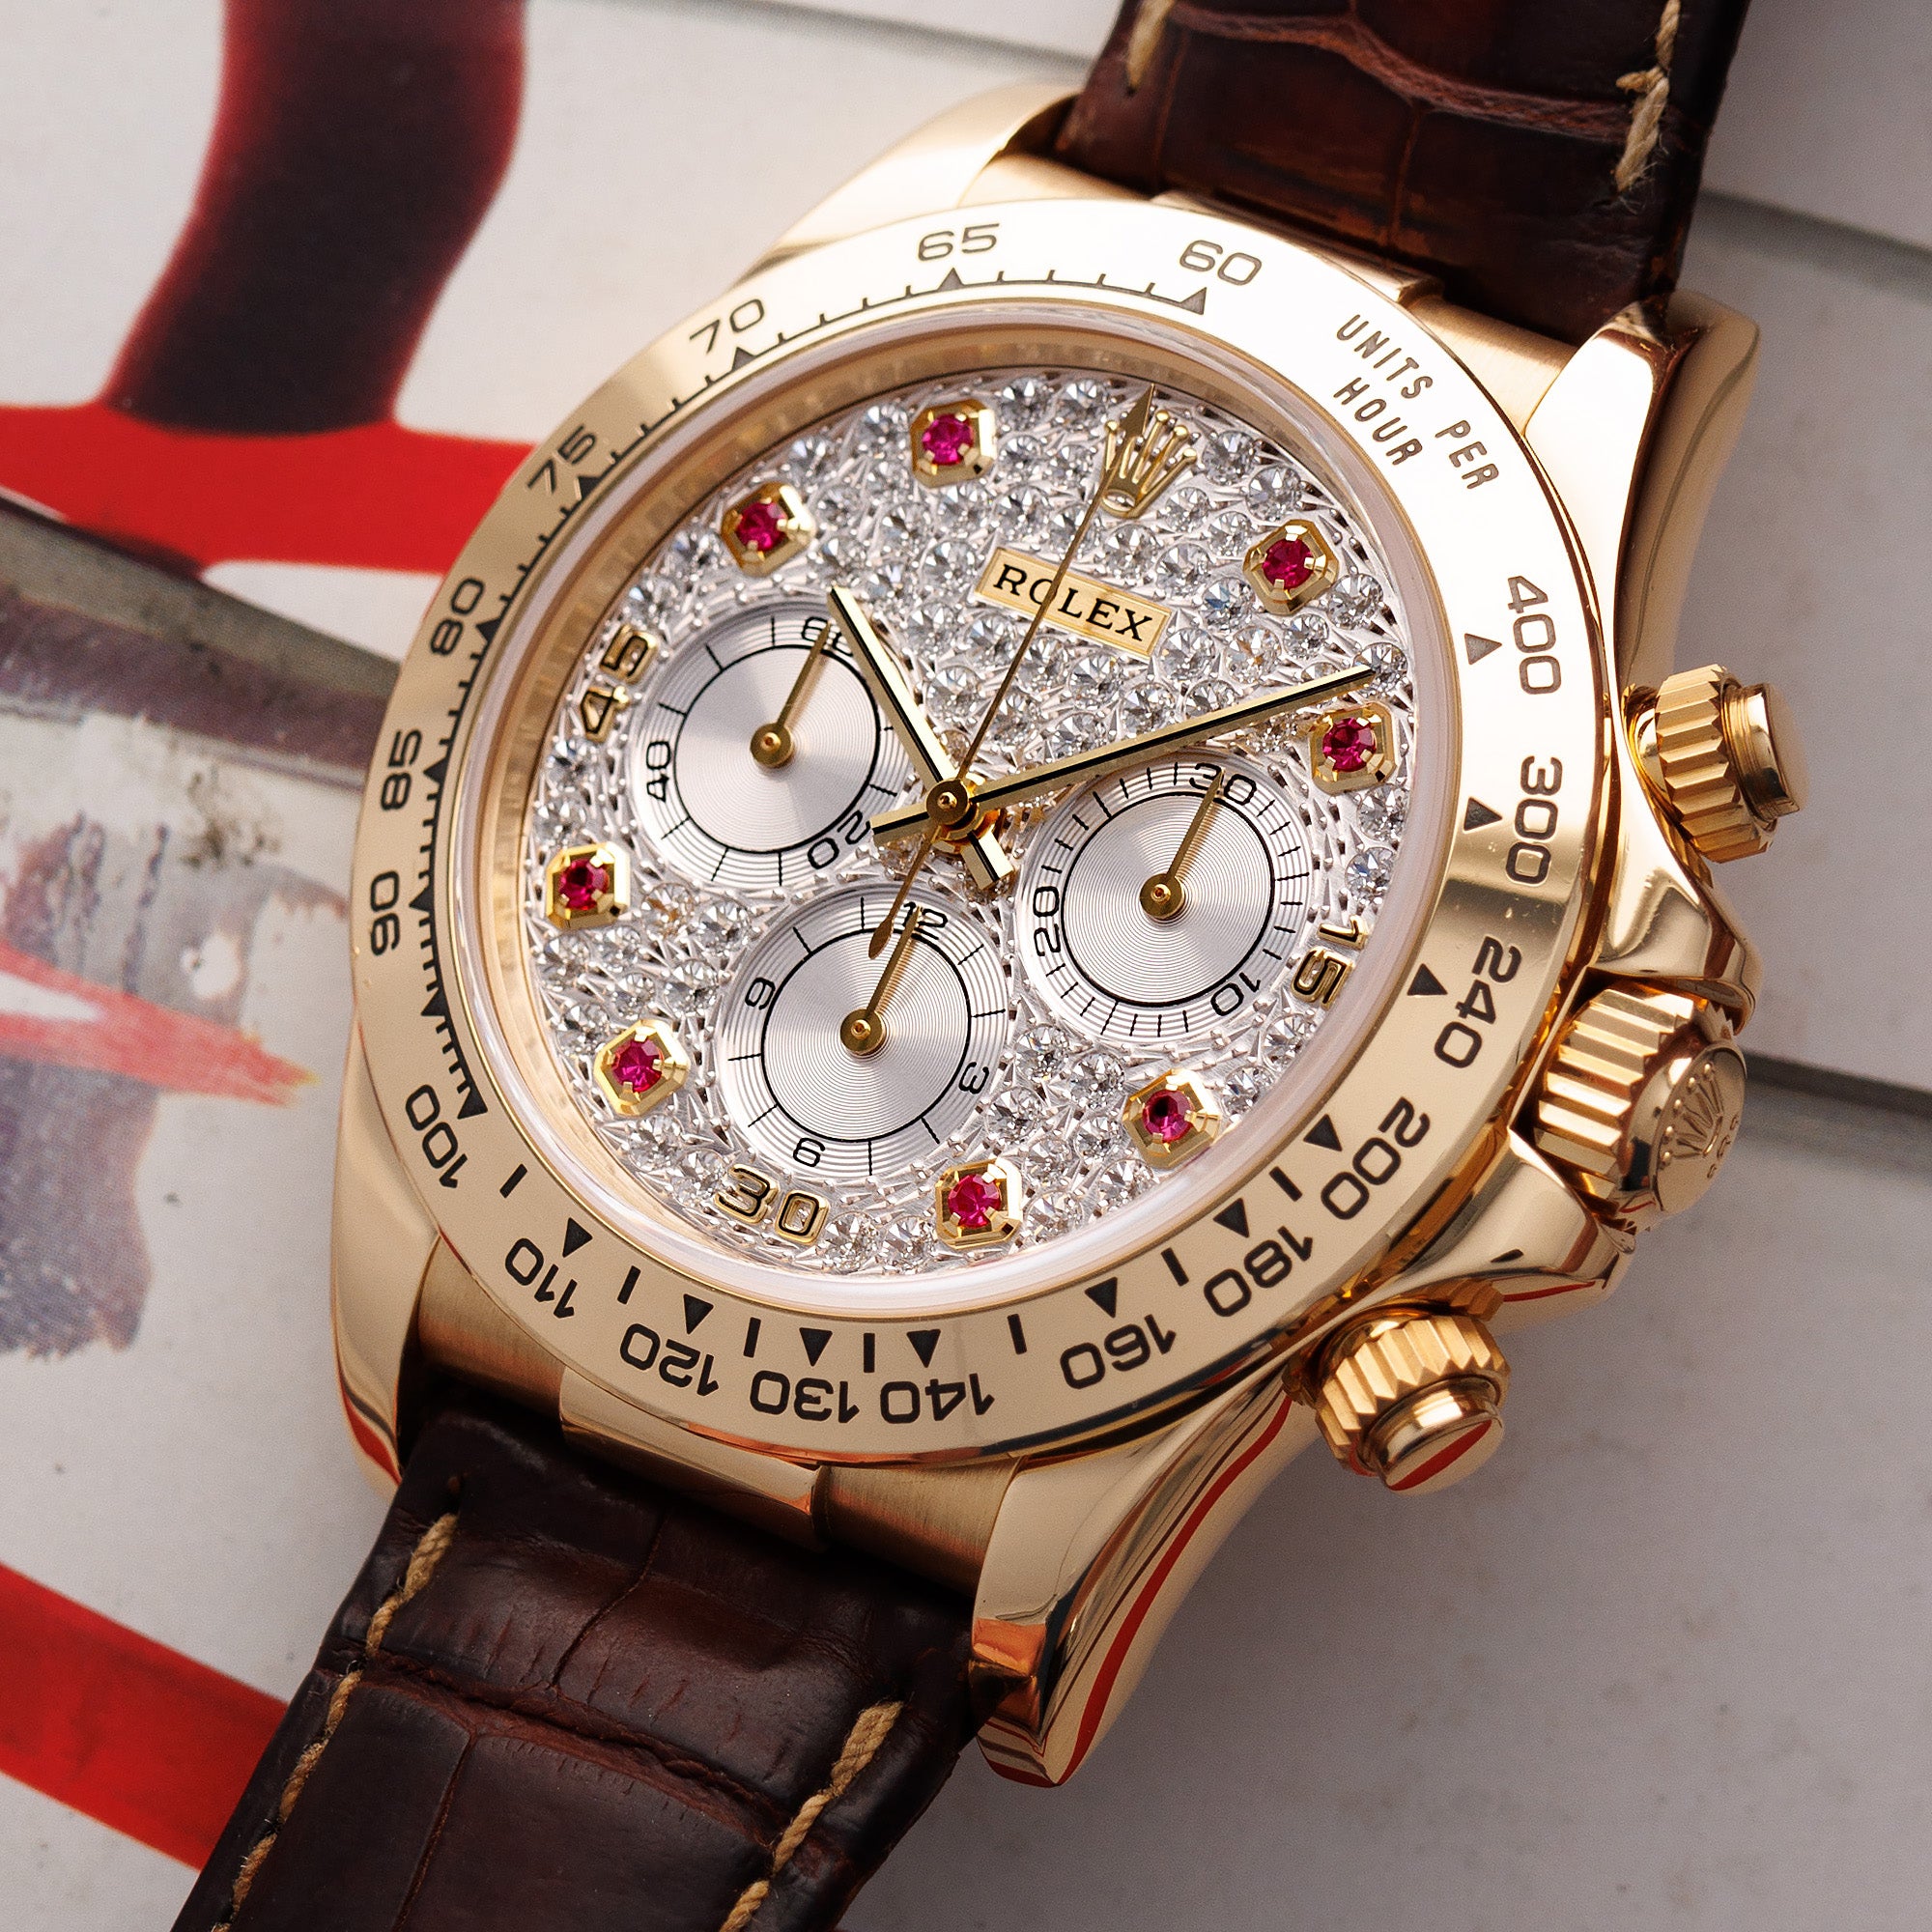 Rolex - Rolex Yellow Gold Zenith Daytona with Pave and Ruby Dial Ref. 16518 - The Keystone Watches